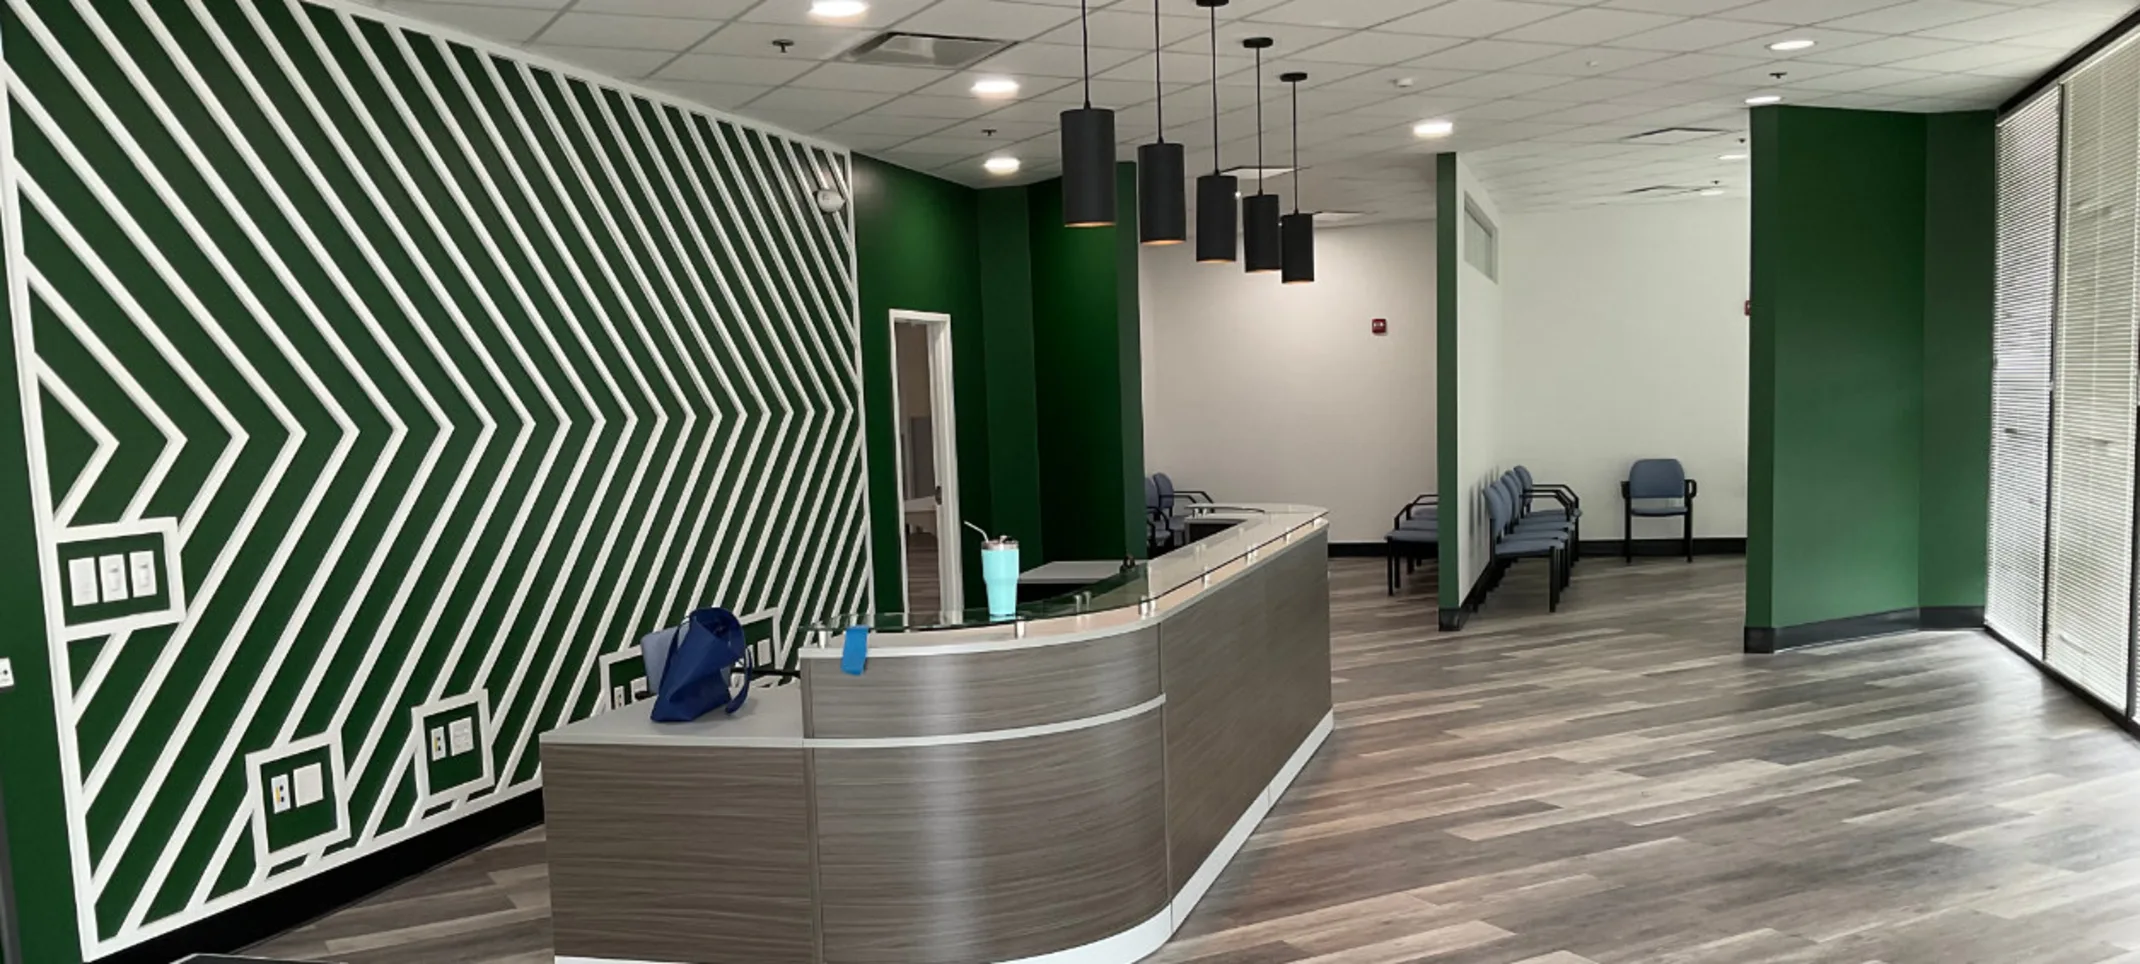 Front entrance of Dale City Animal Hospital with wooden, green, white and black decor